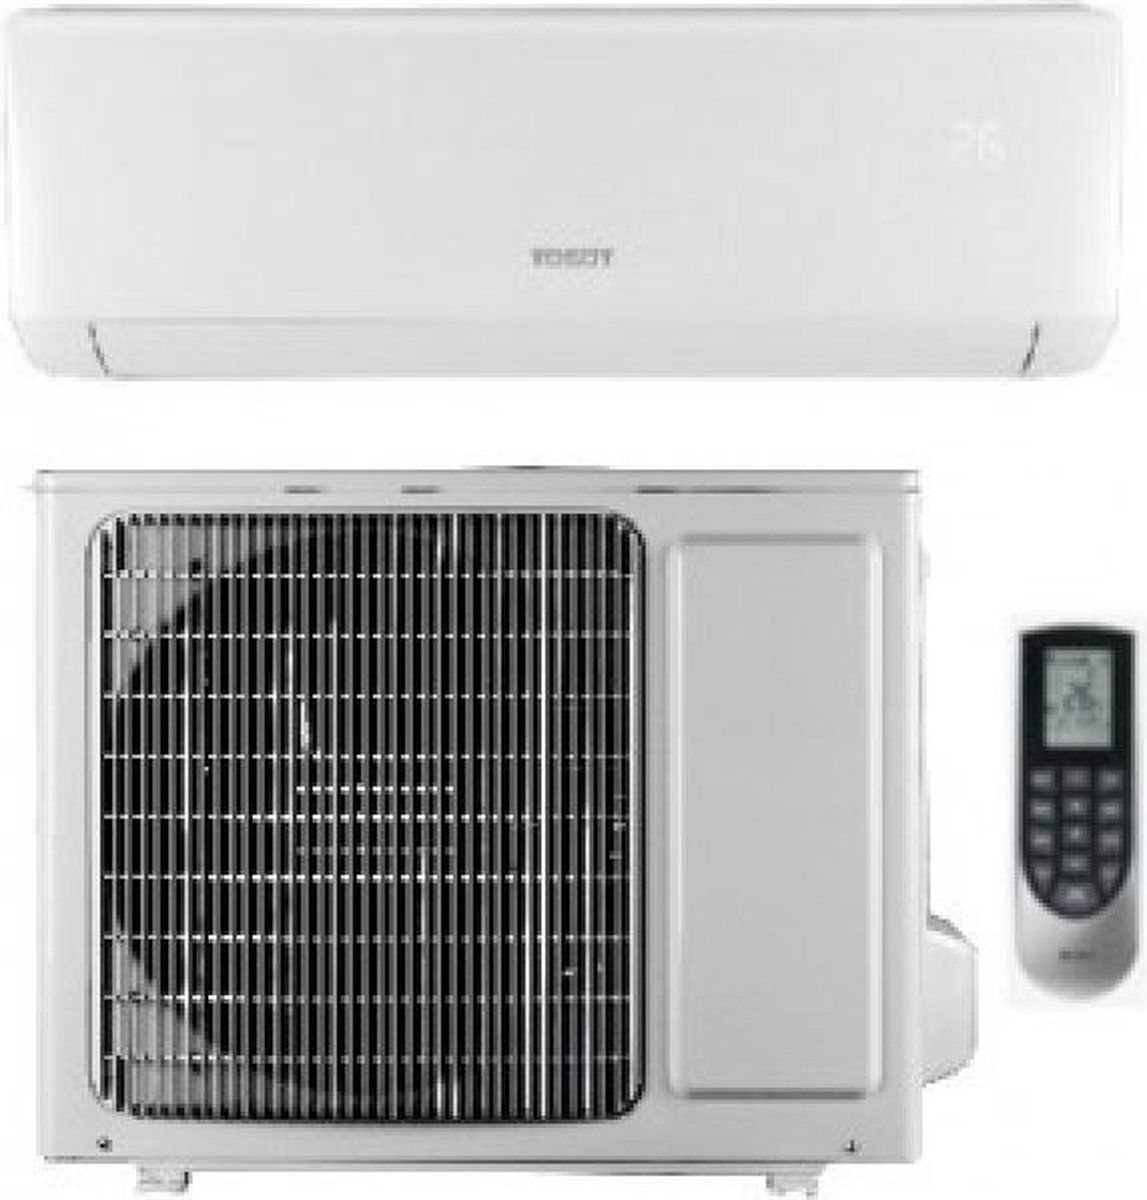 paus Haan Speciaal Tosot 3,5kW airco | bol.com